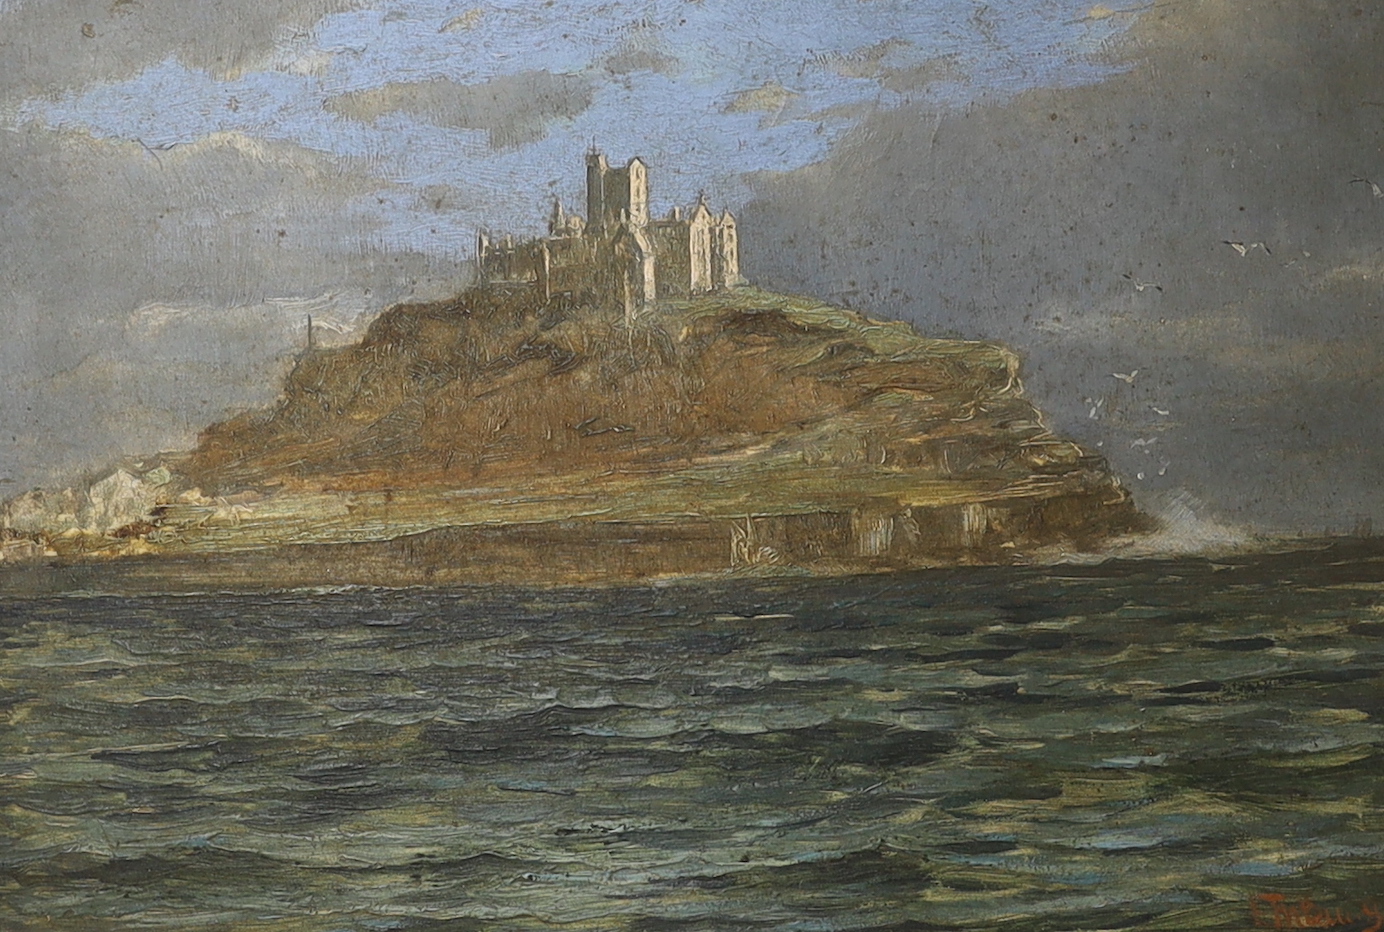 Early 20th century, oil on board, St Michael's Mount, indistinctly signed lower right, 24 x 34cm, ornate gilt framed